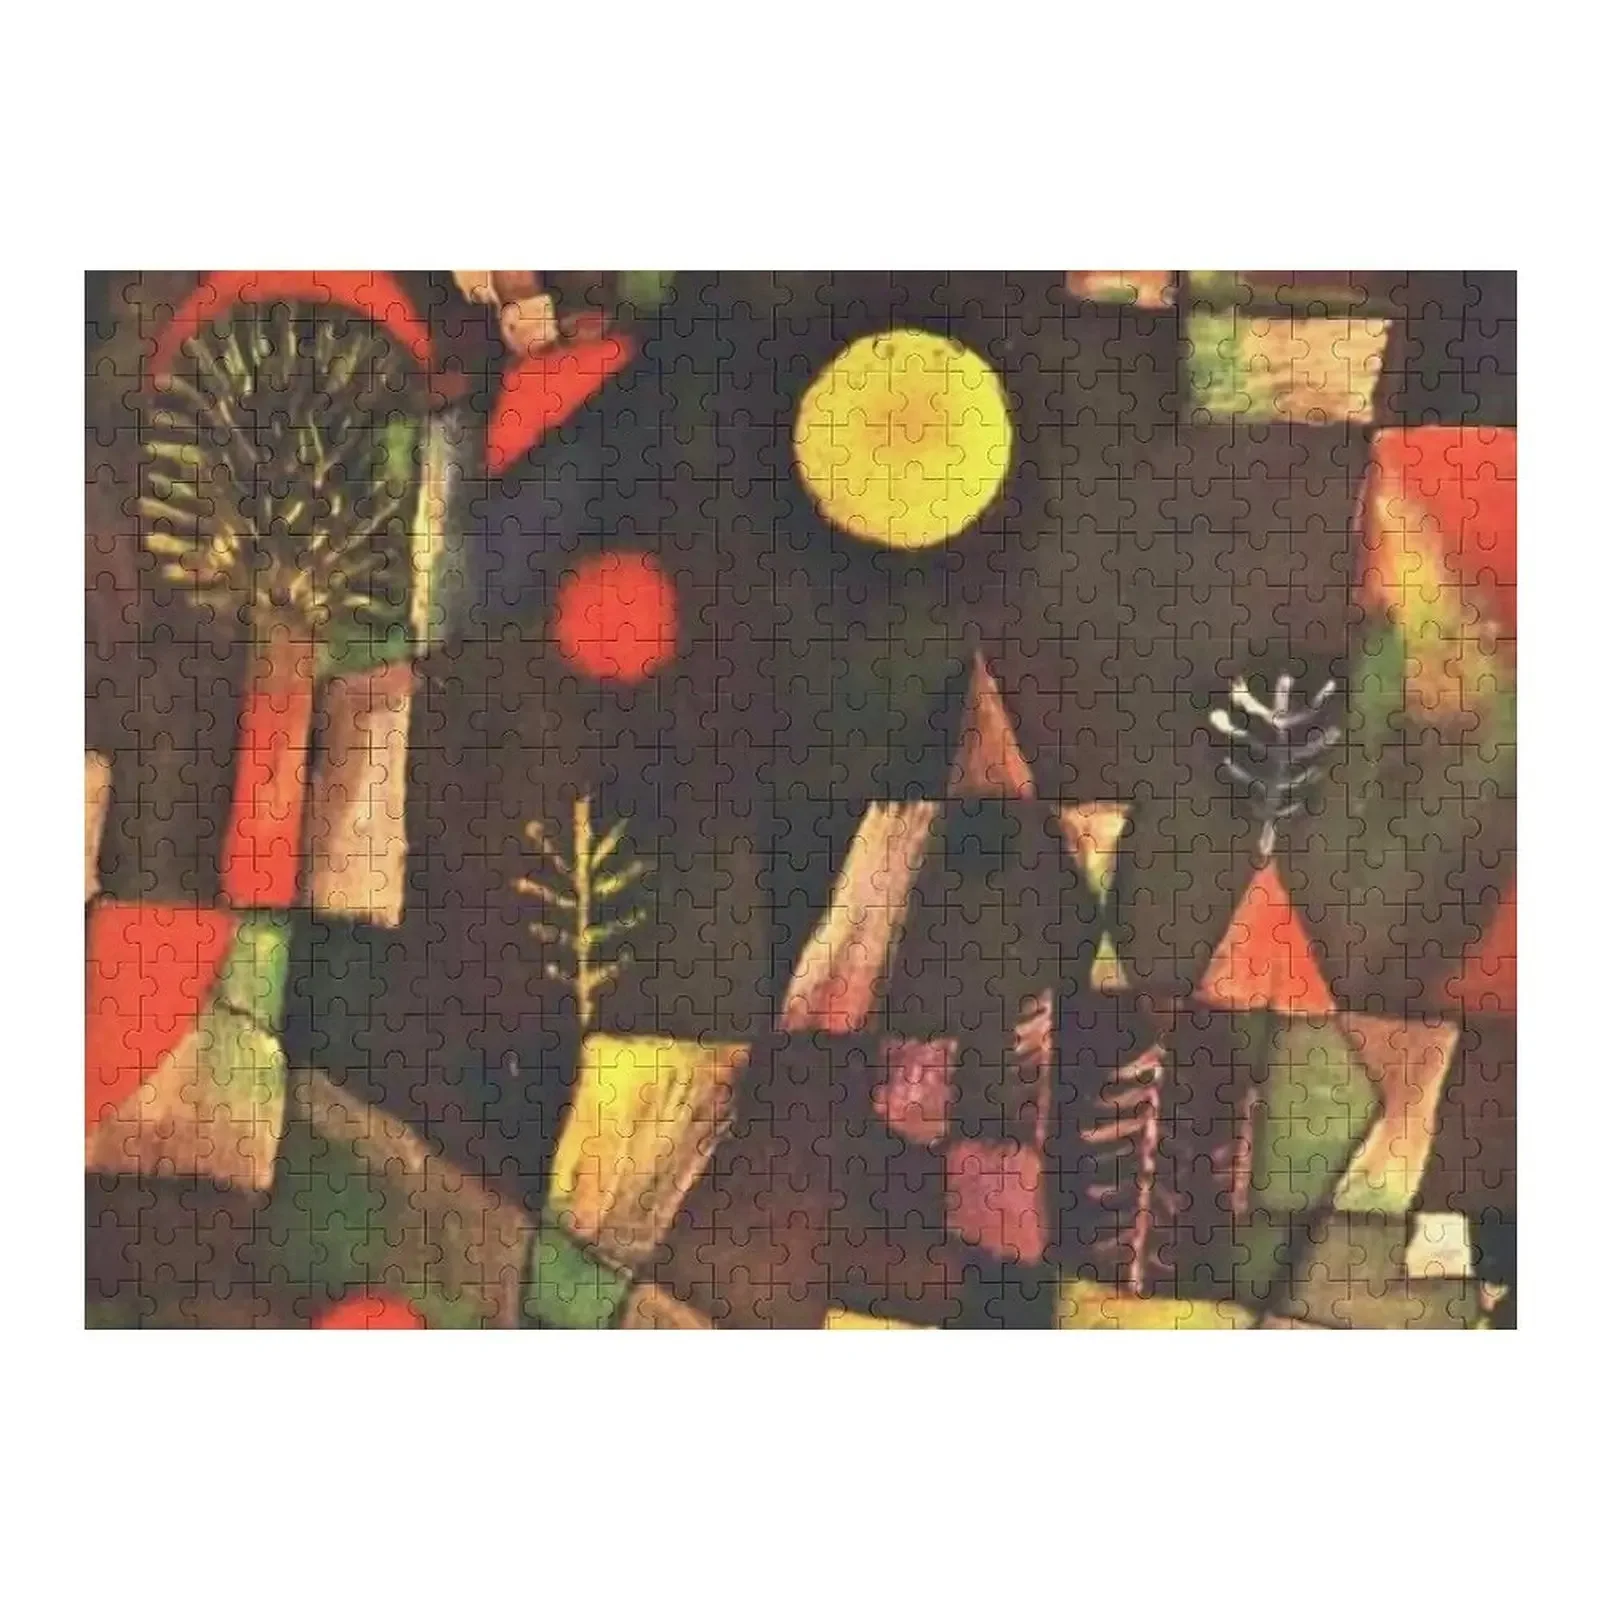 Paul Klee - Full Moon Jigsaw Puzzle Scale Motors Iq Children Puzzle klee